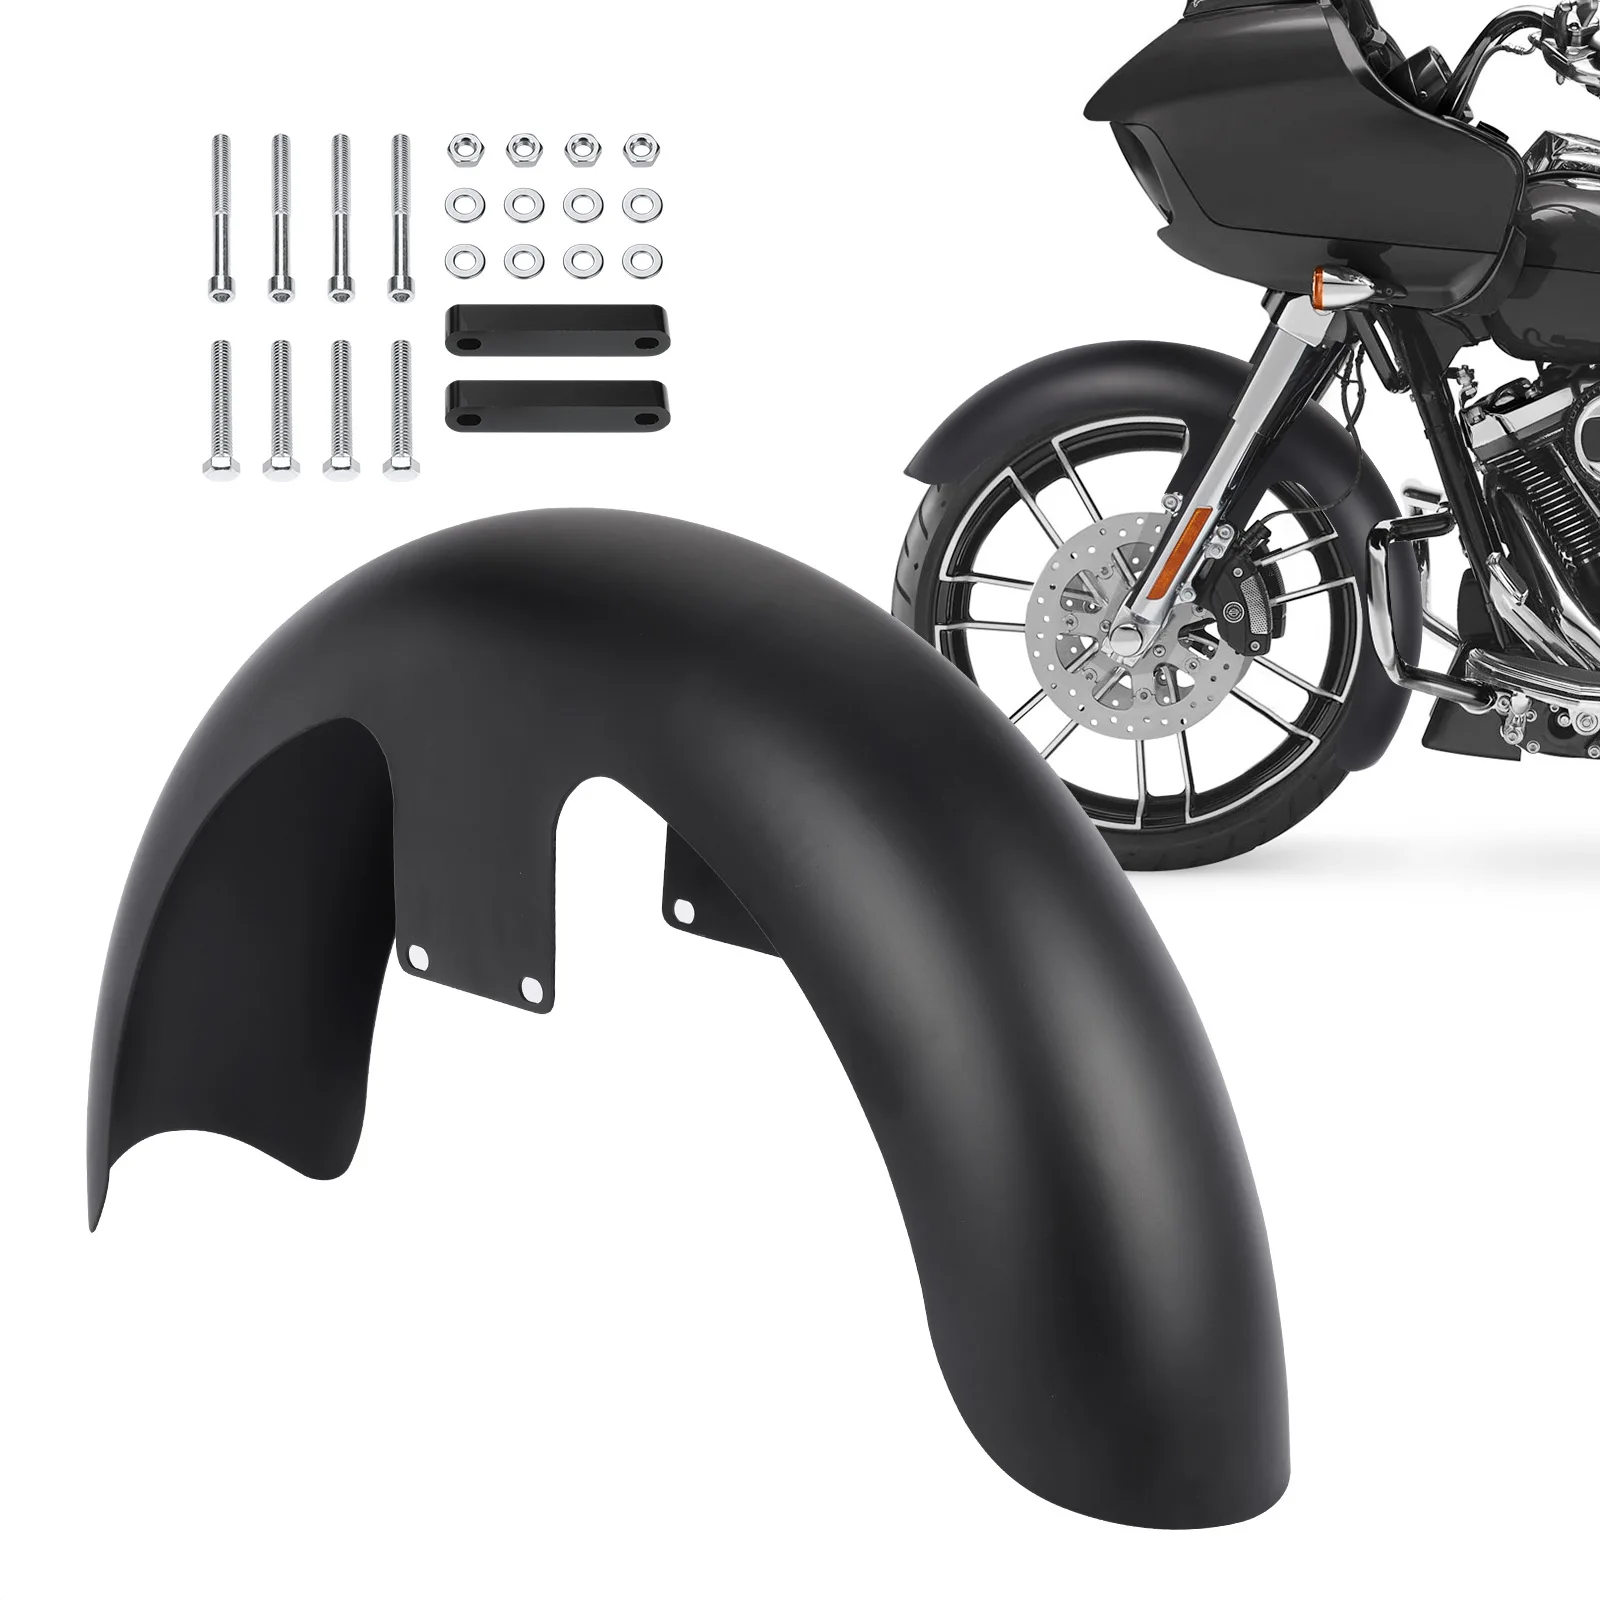 

19" plastics Mudguard Motorcycle Front Fender For Harley Touring Electra Street Glide Road King Ultra Custom Baggers 2014-2021